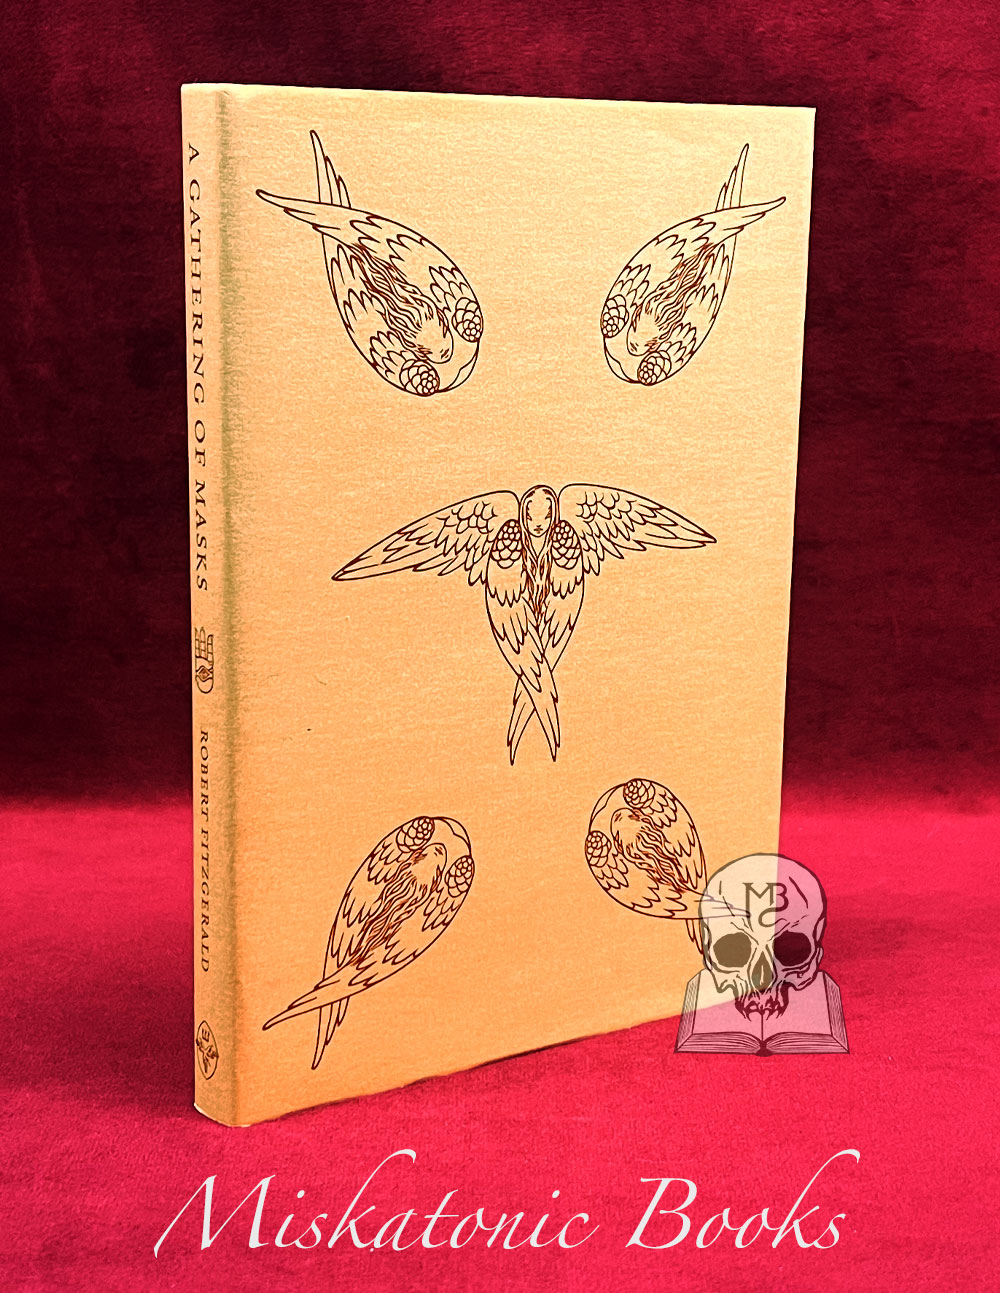 A GATHERING OF MASKS by Robert Fitzgerald - Limited Edition Hardcover